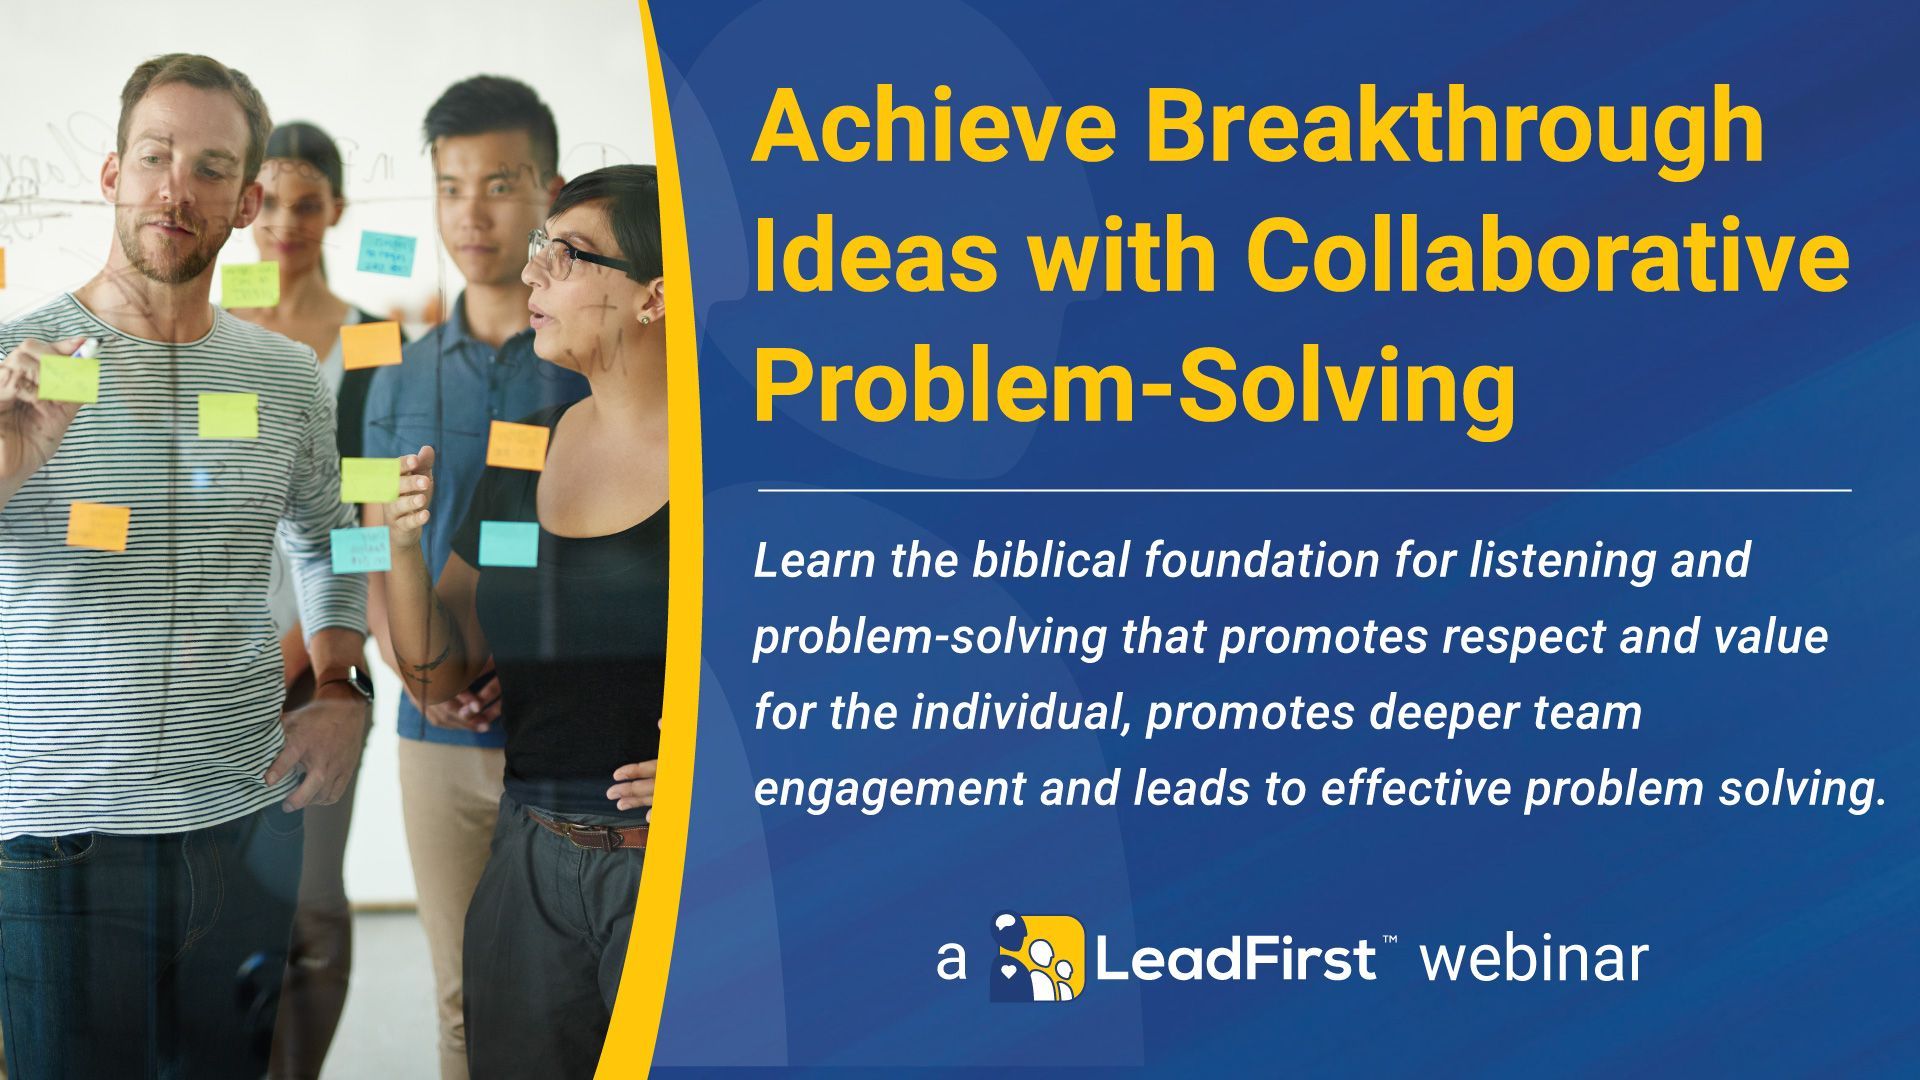 a poster that says achieve breakthrough ideas with collaborative problem-solving